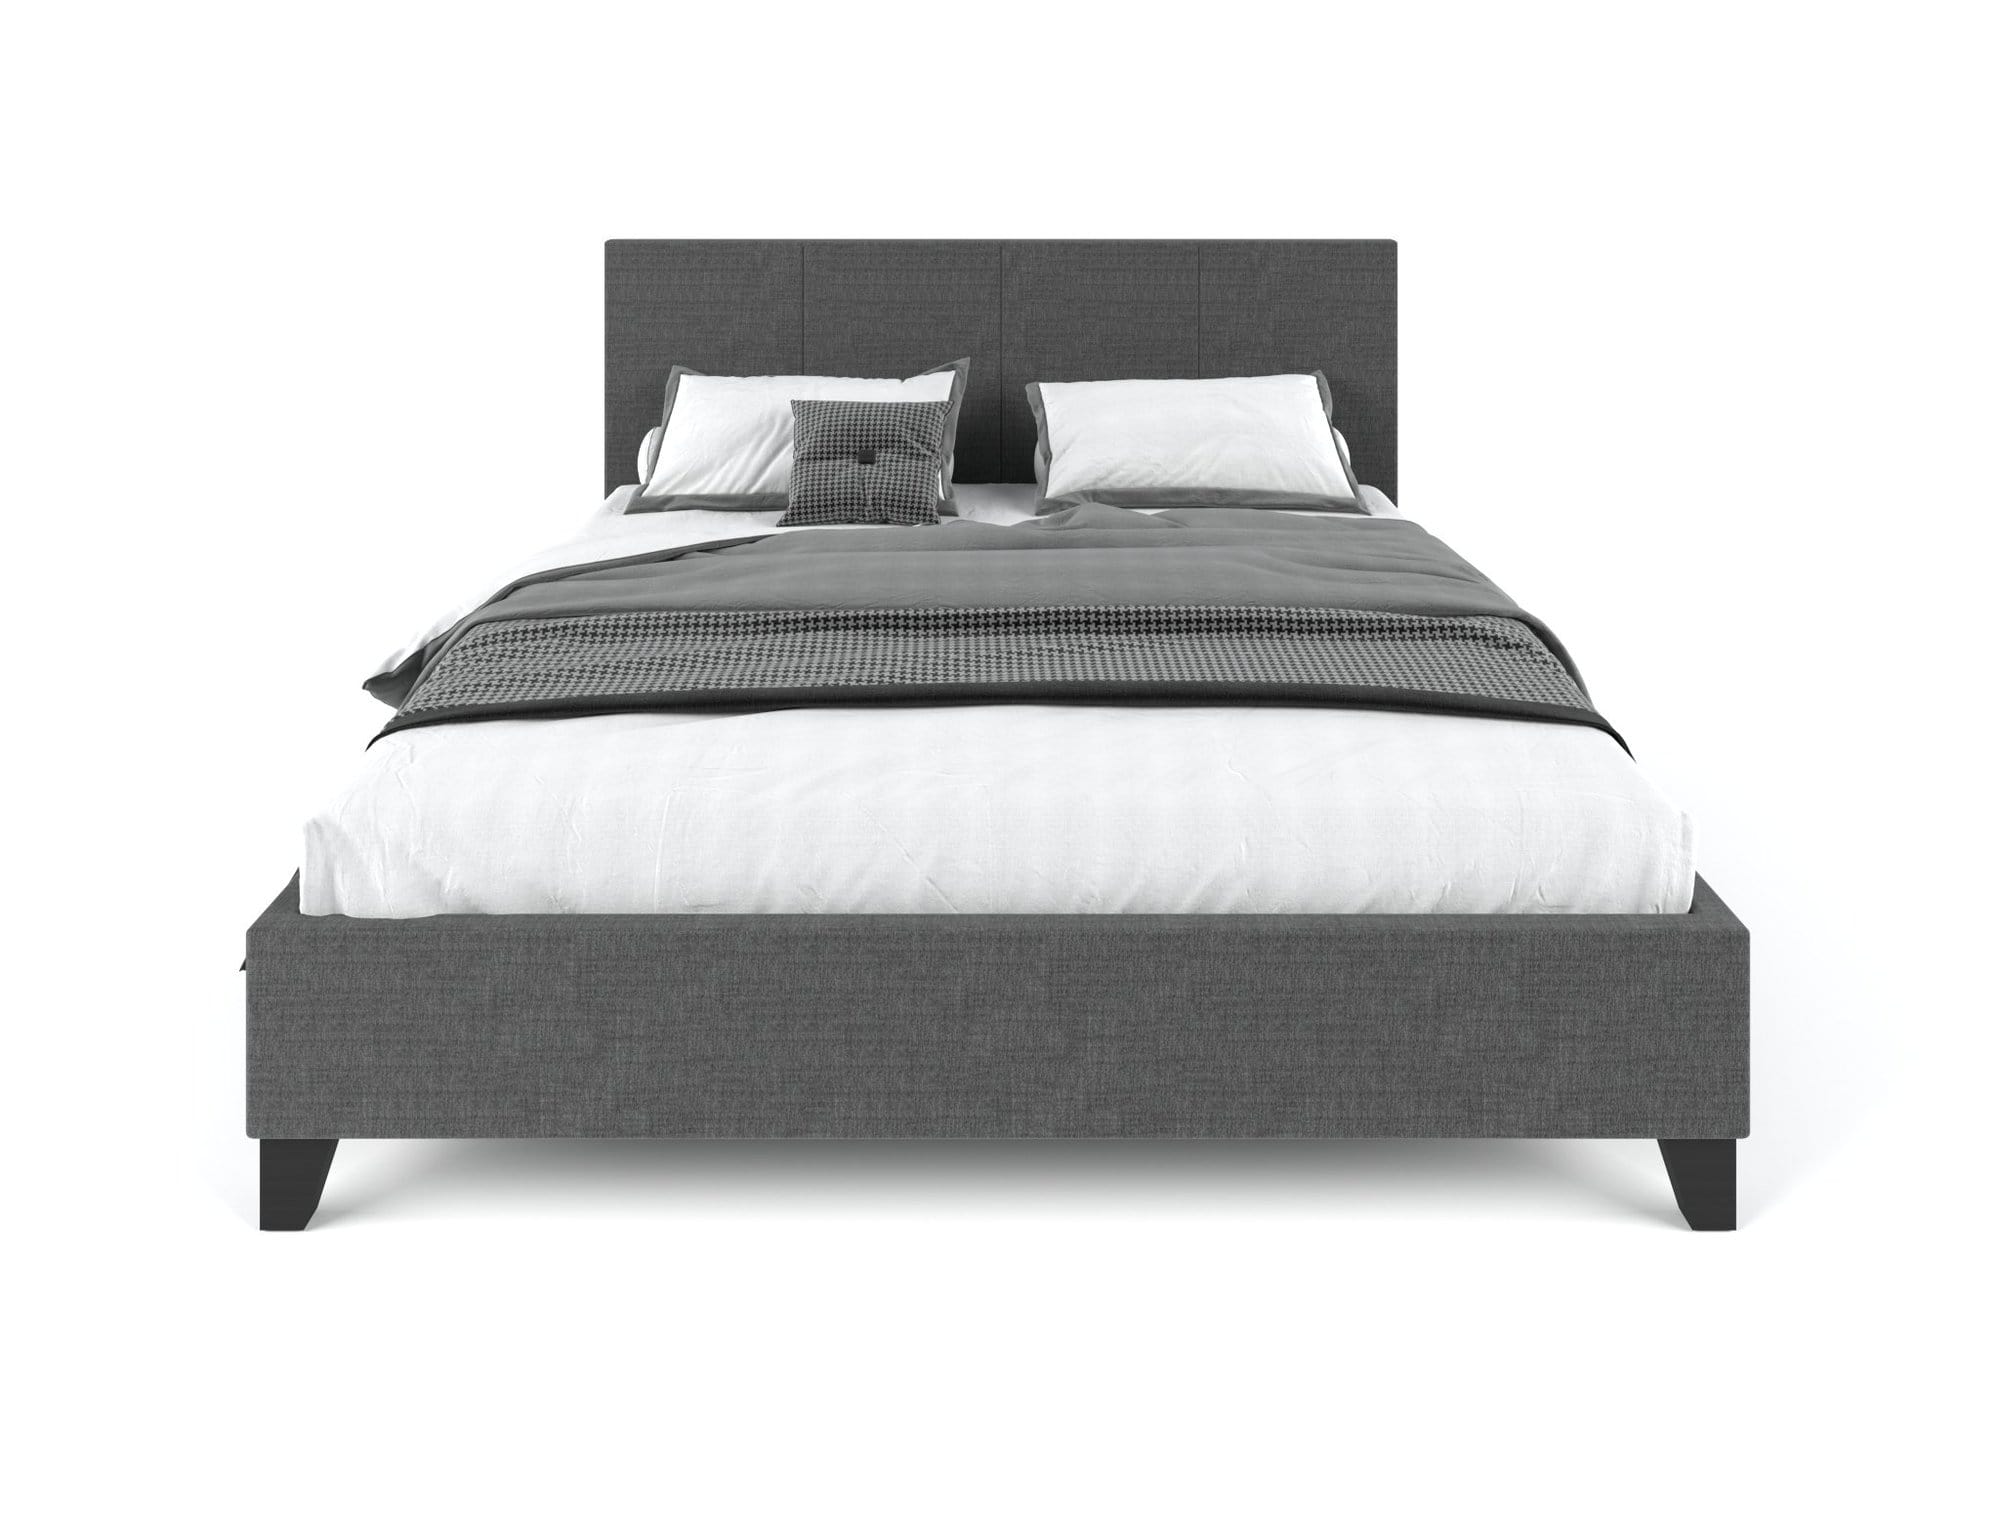 Pale Fabric Bed Frame - Charcoal Queen - Newstart Furniture